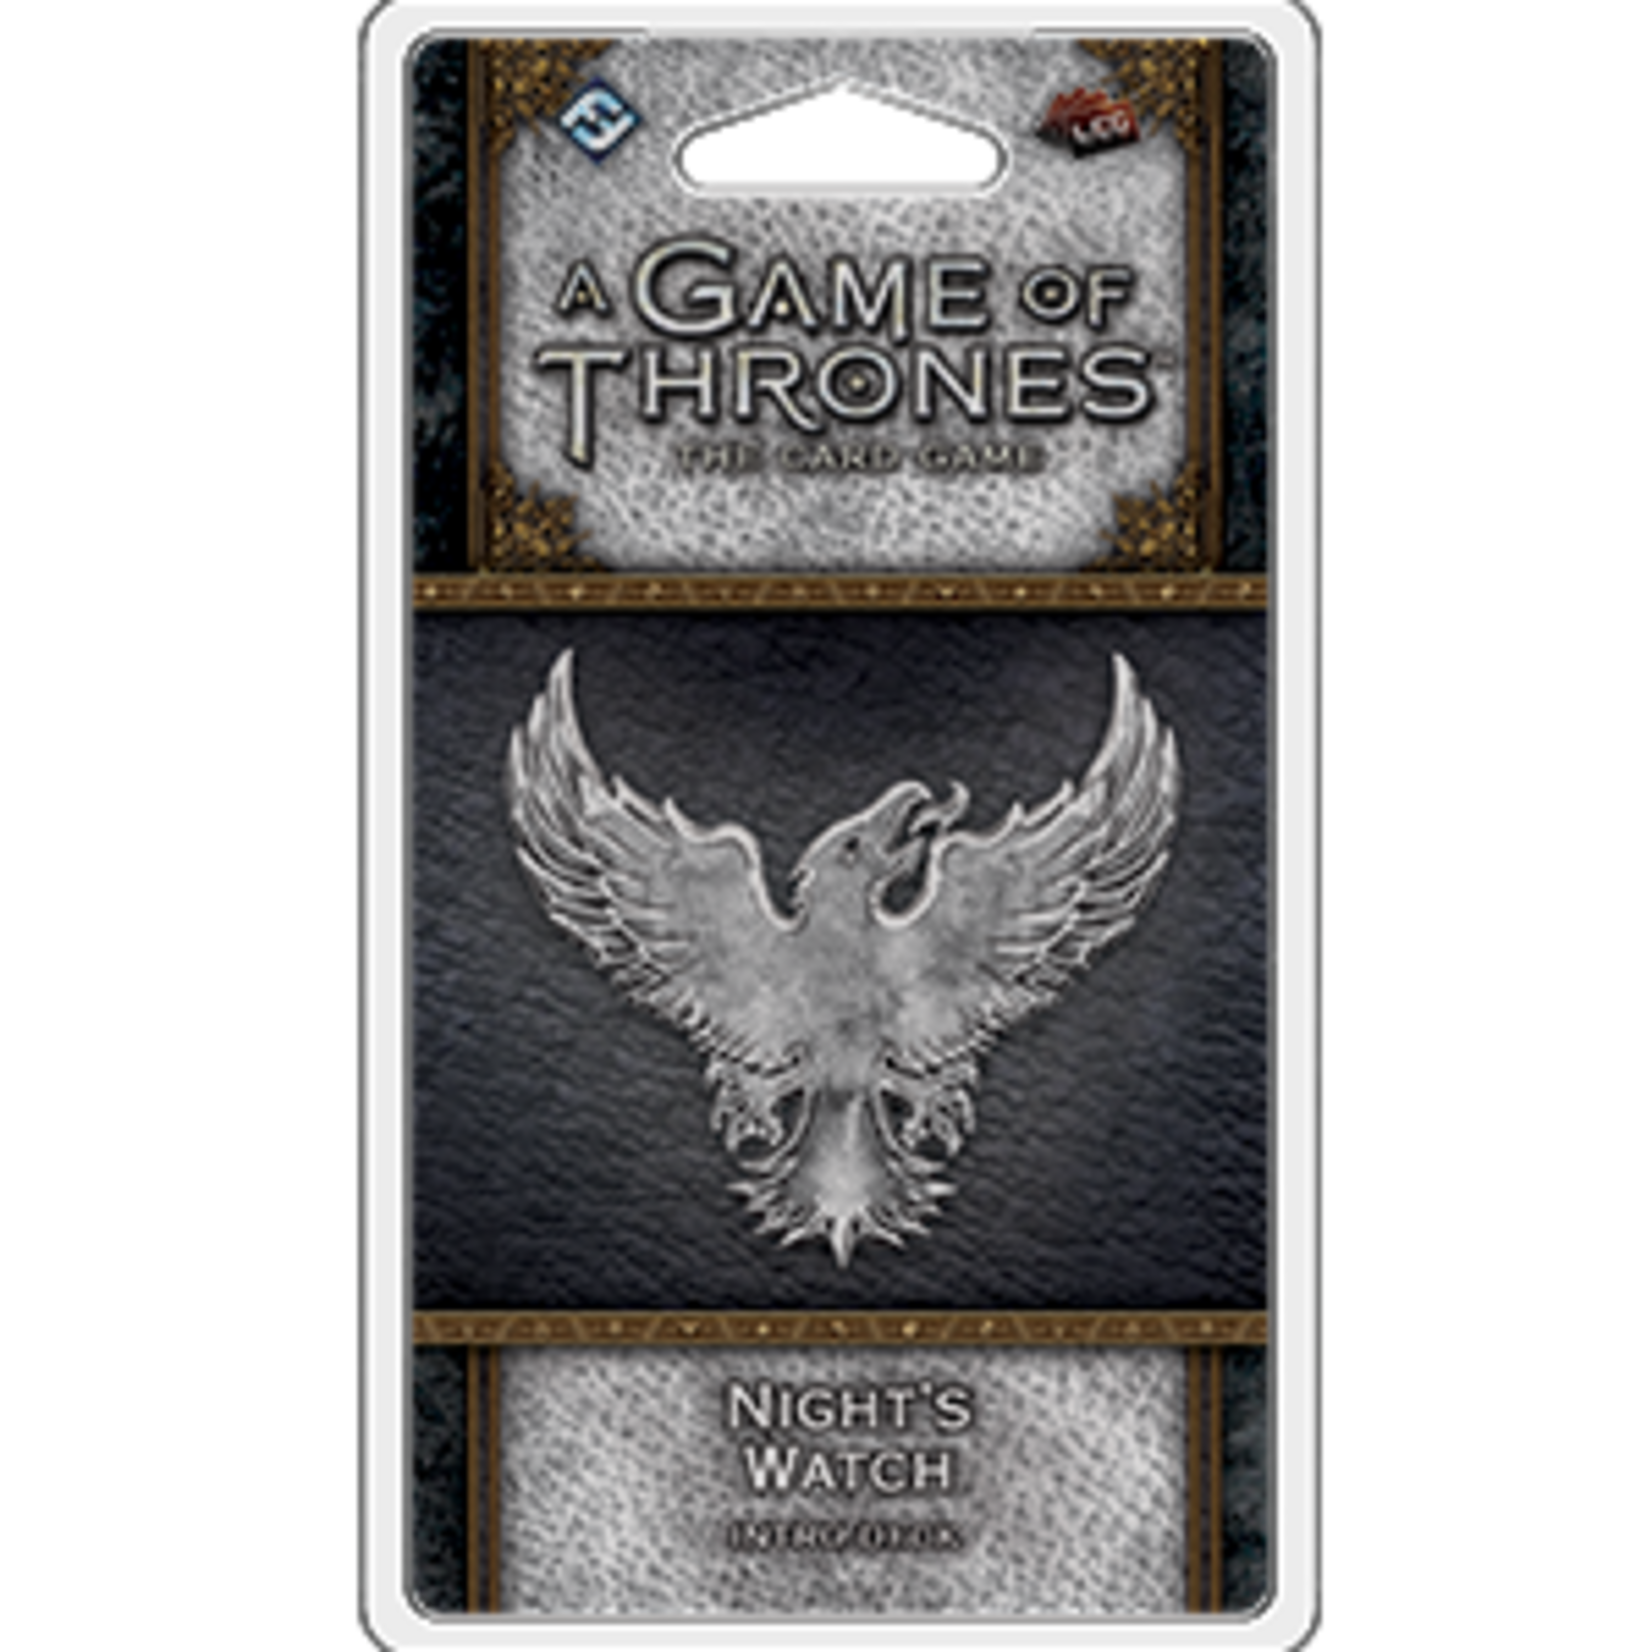 Game of Thrones LCG Night’s Watch Intro Deck